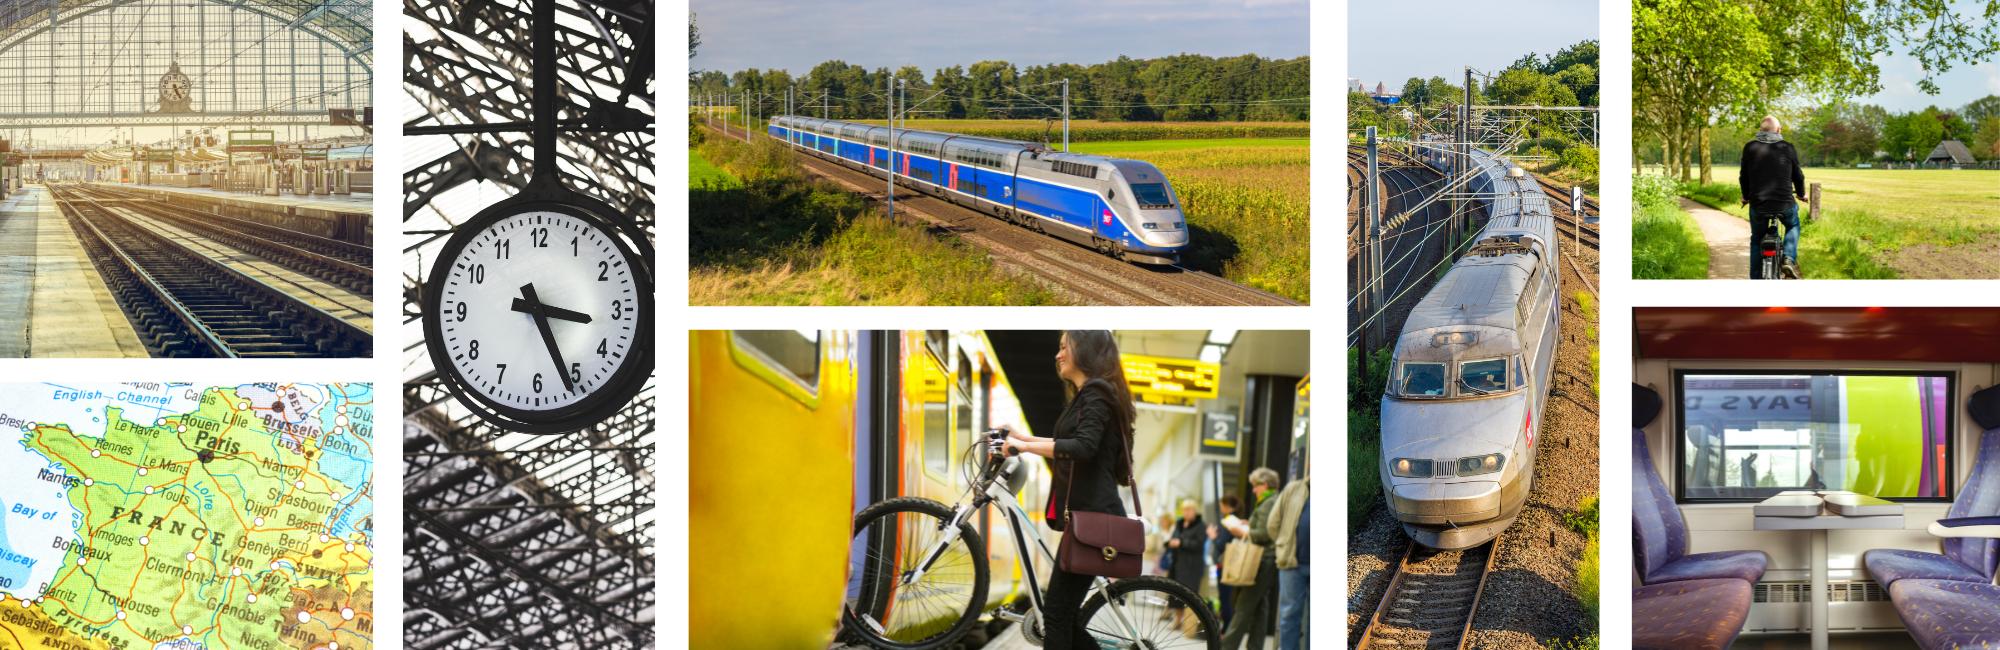 Travelling by train with your bike - French Bike Tours